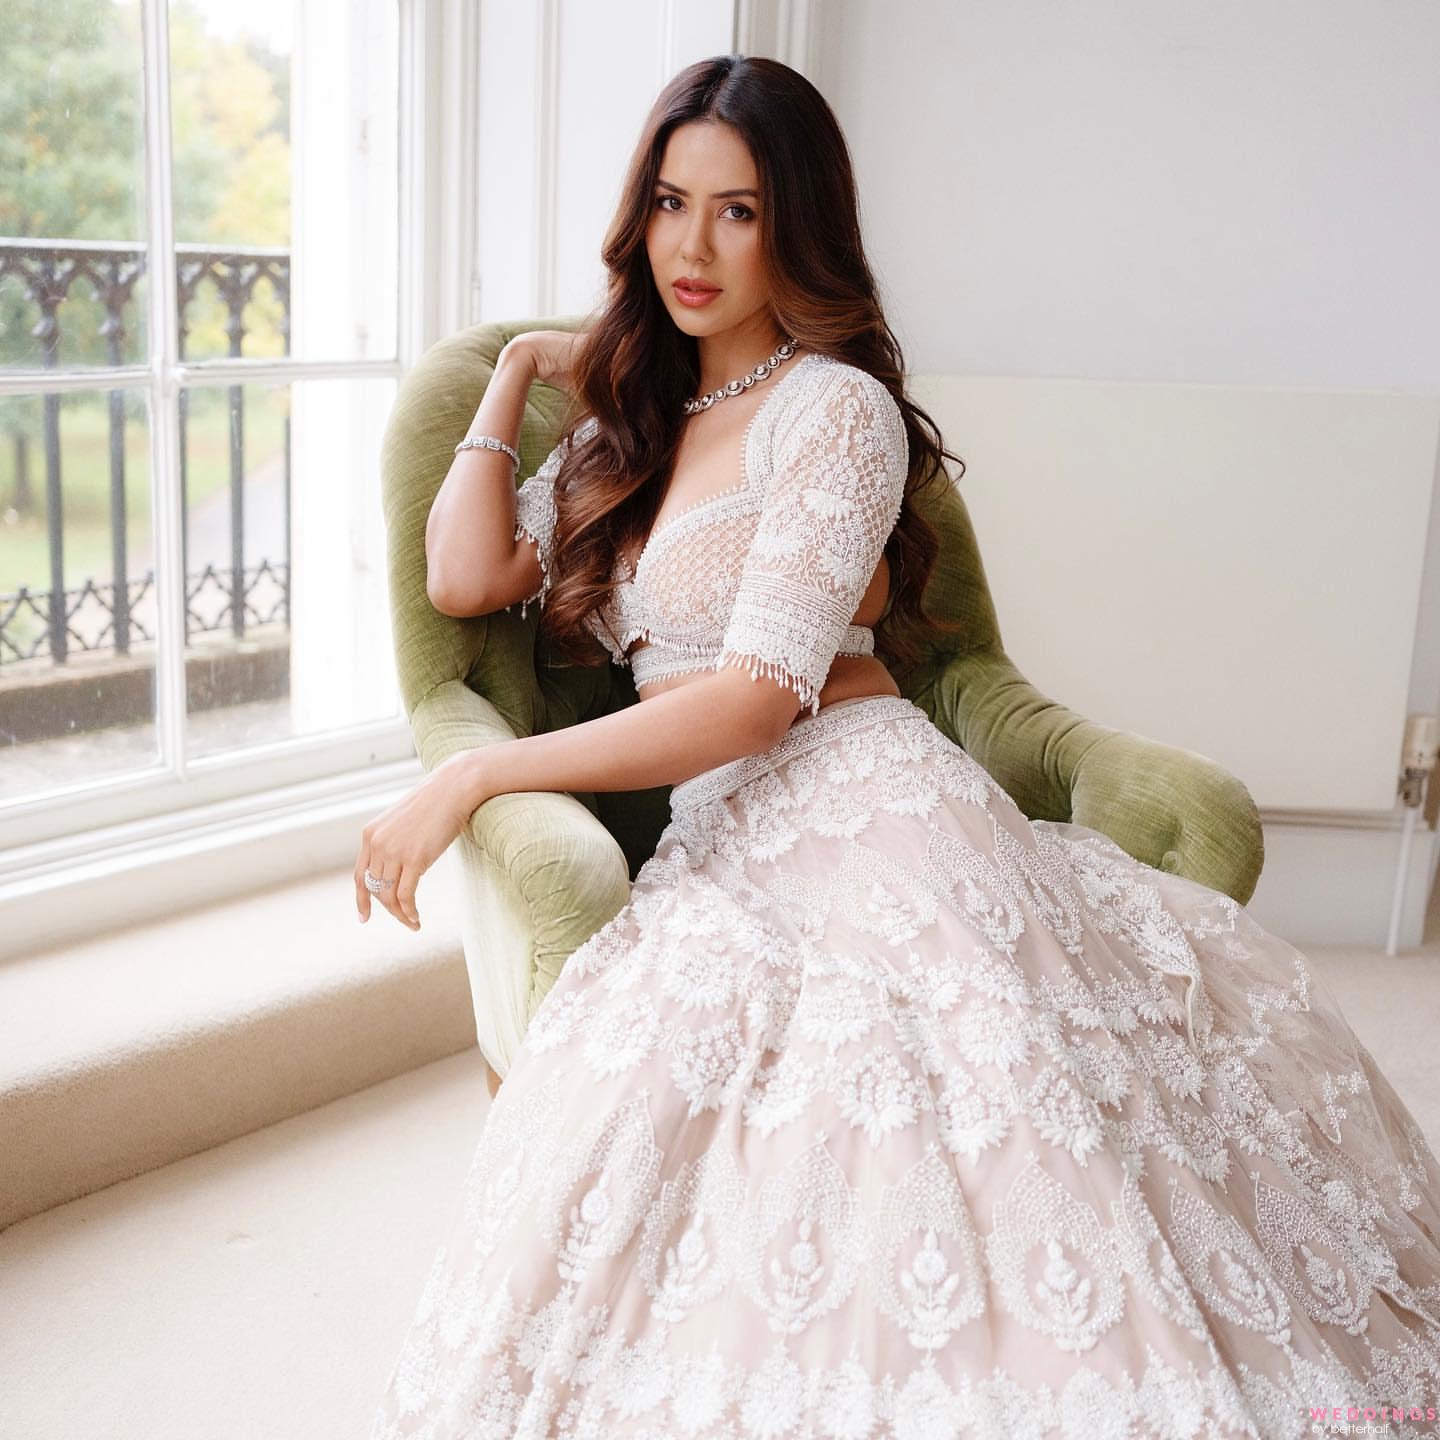 Bride-to-be Parineeti Chopra's ethnic prowess you can't miss |  TOIPhotogallery